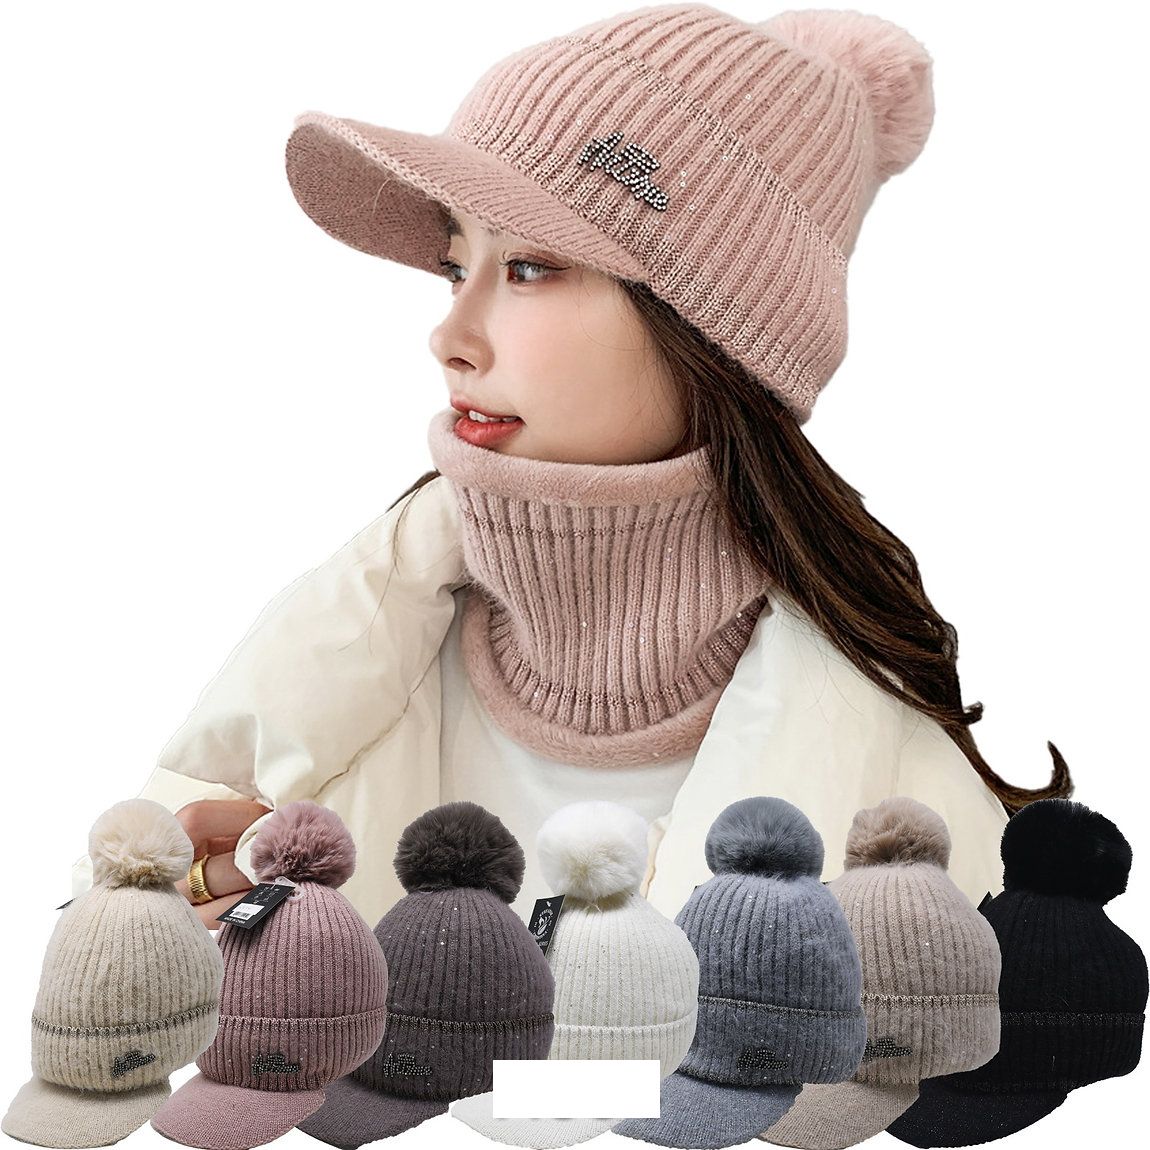 12 Pieces of Women's Winter Fashion Hats Fuzzy Style In Assorted Colors